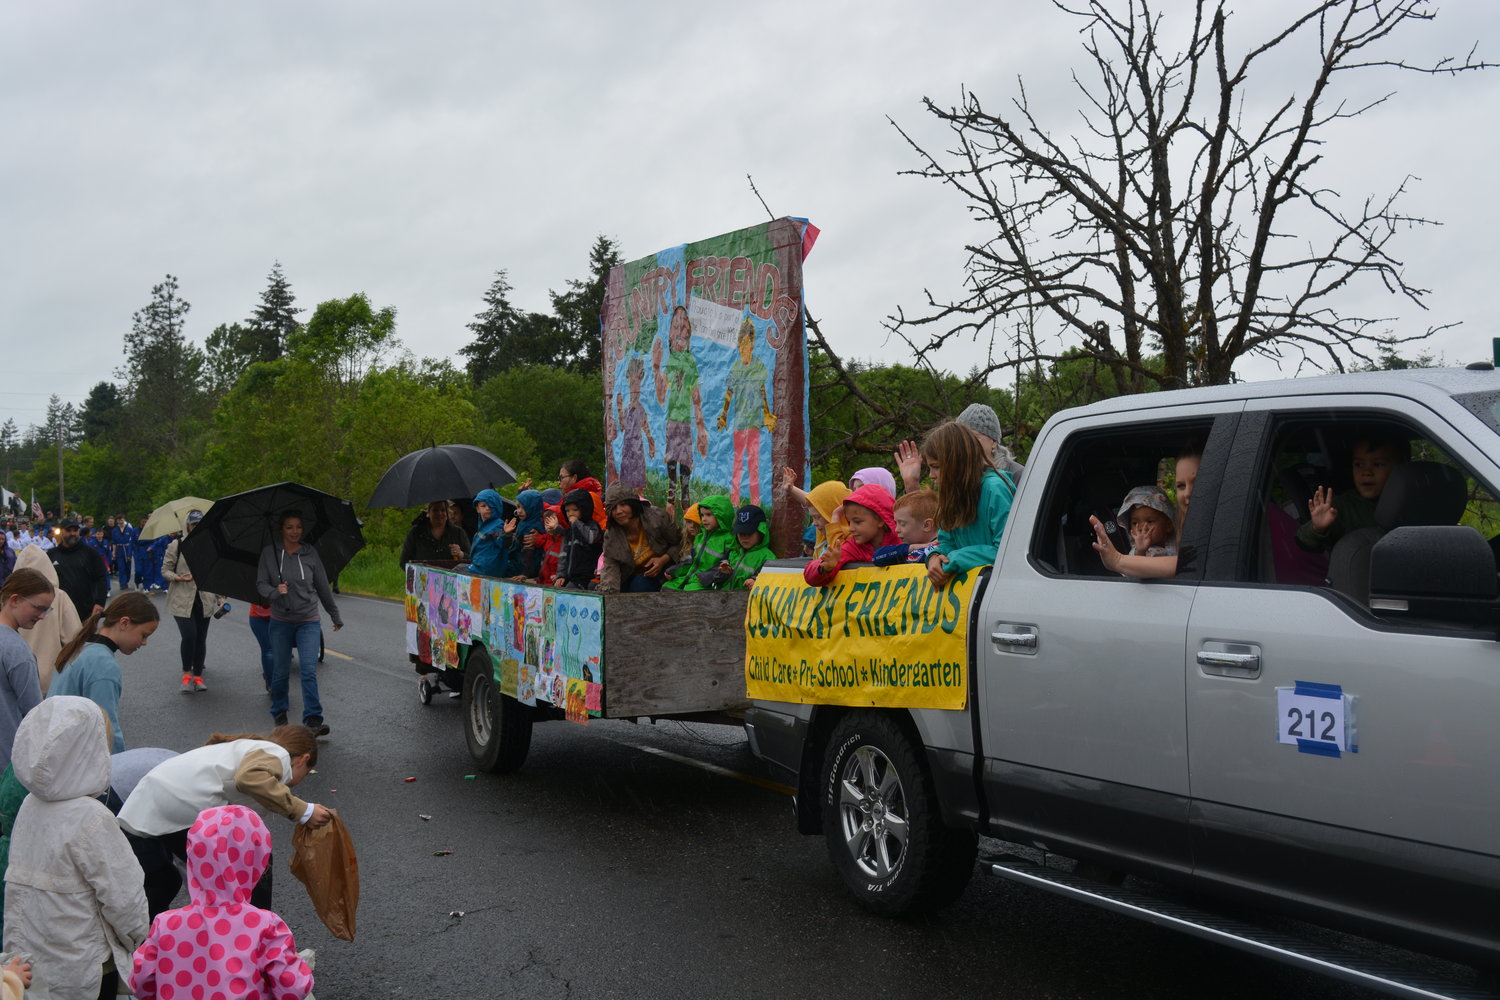 Kids from Country Friends Childcare pass out candy to other children at the Fun Days parade on June 4.